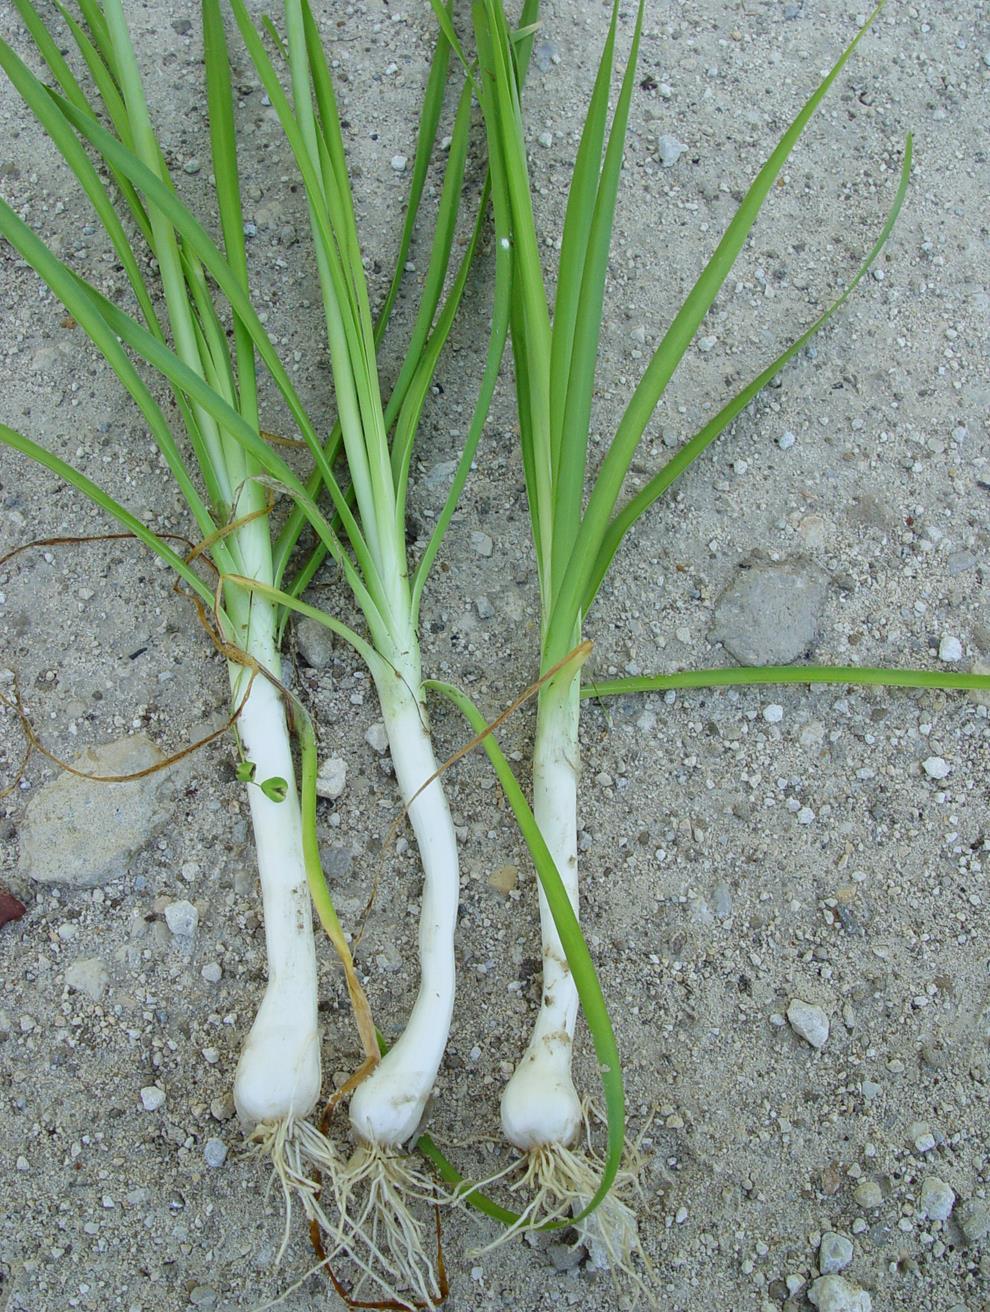 Wild Onion The wild onion is a strong flavored bulb. It is smaller than the farmed onions you see in stores.